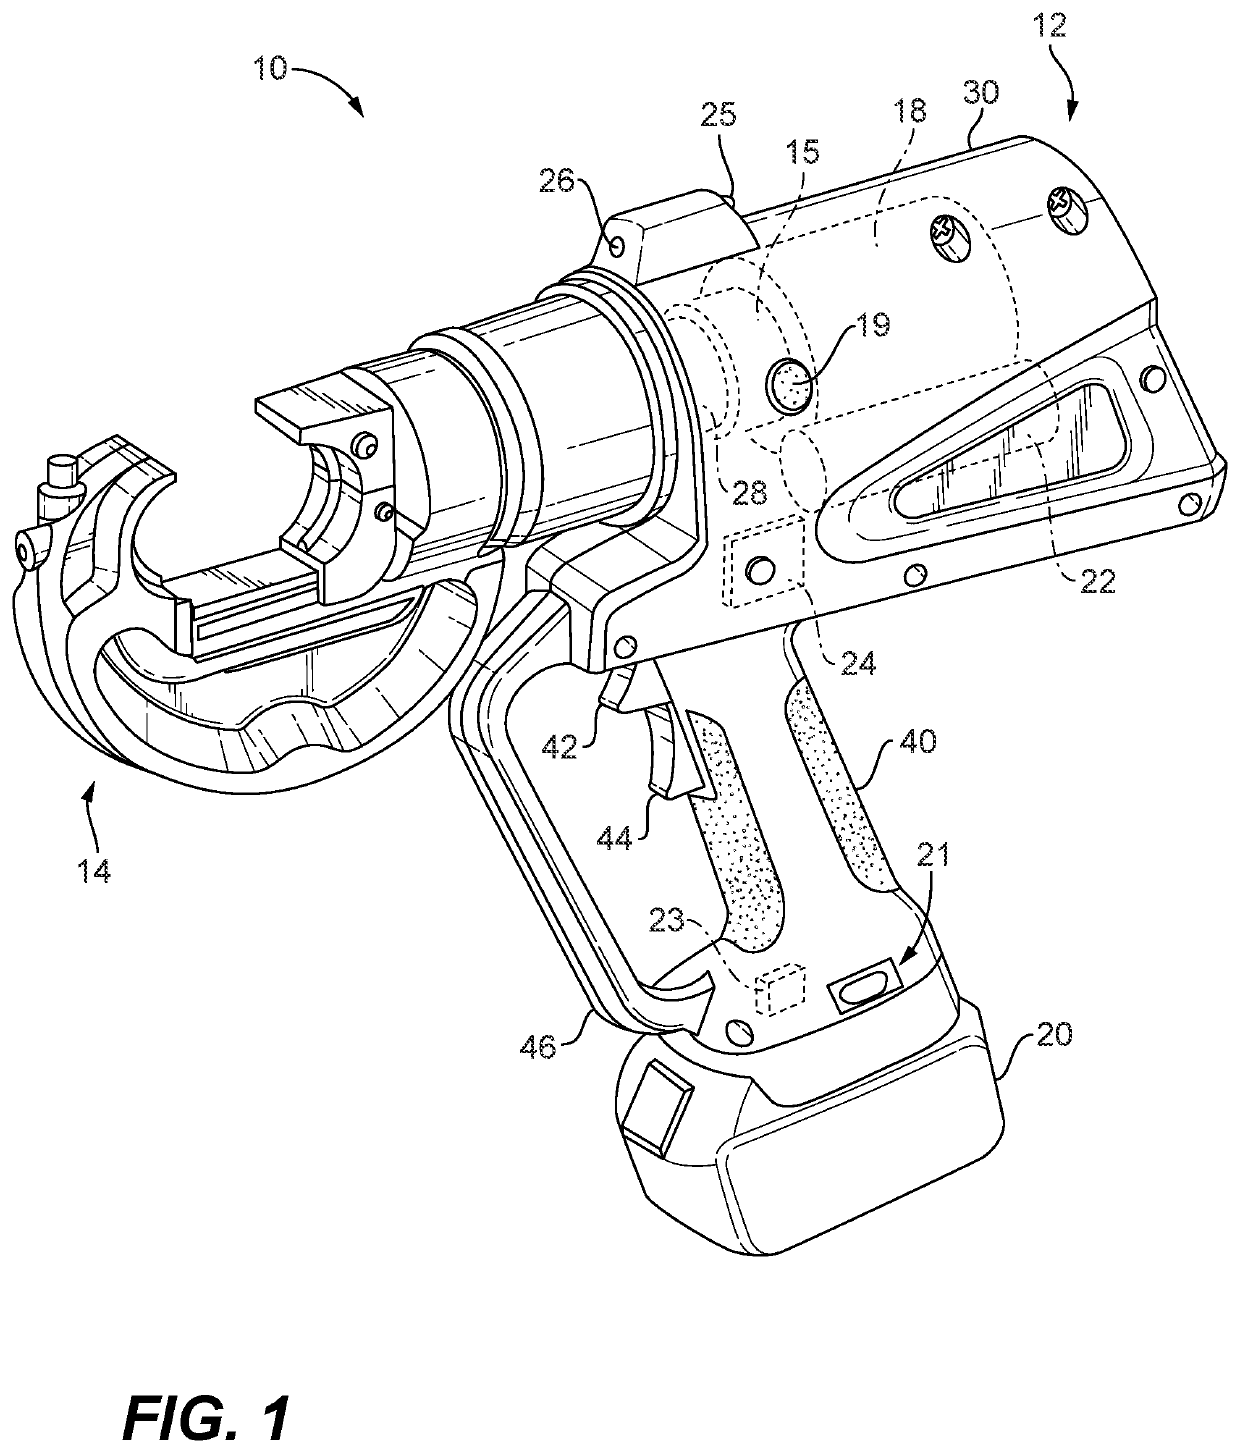 Power tool with crimp image